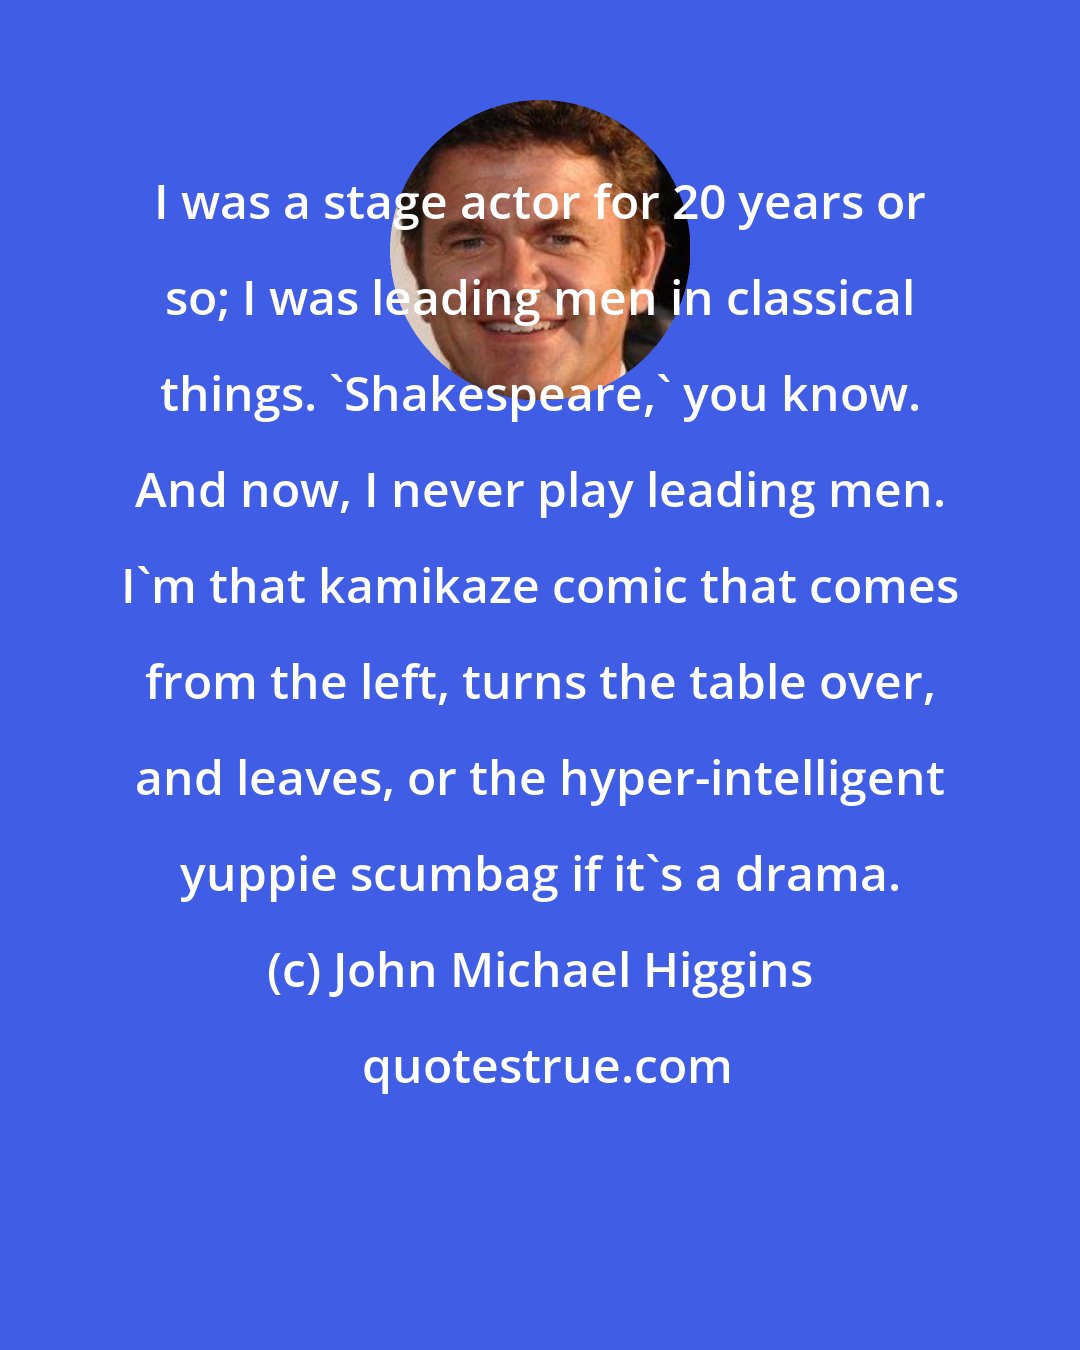 John Michael Higgins: I was a stage actor for 20 years or so; I was leading men in classical things. 'Shakespeare,' you know. And now, I never play leading men. I'm that kamikaze comic that comes from the left, turns the table over, and leaves, or the hyper-intelligent yuppie scumbag if it's a drama.